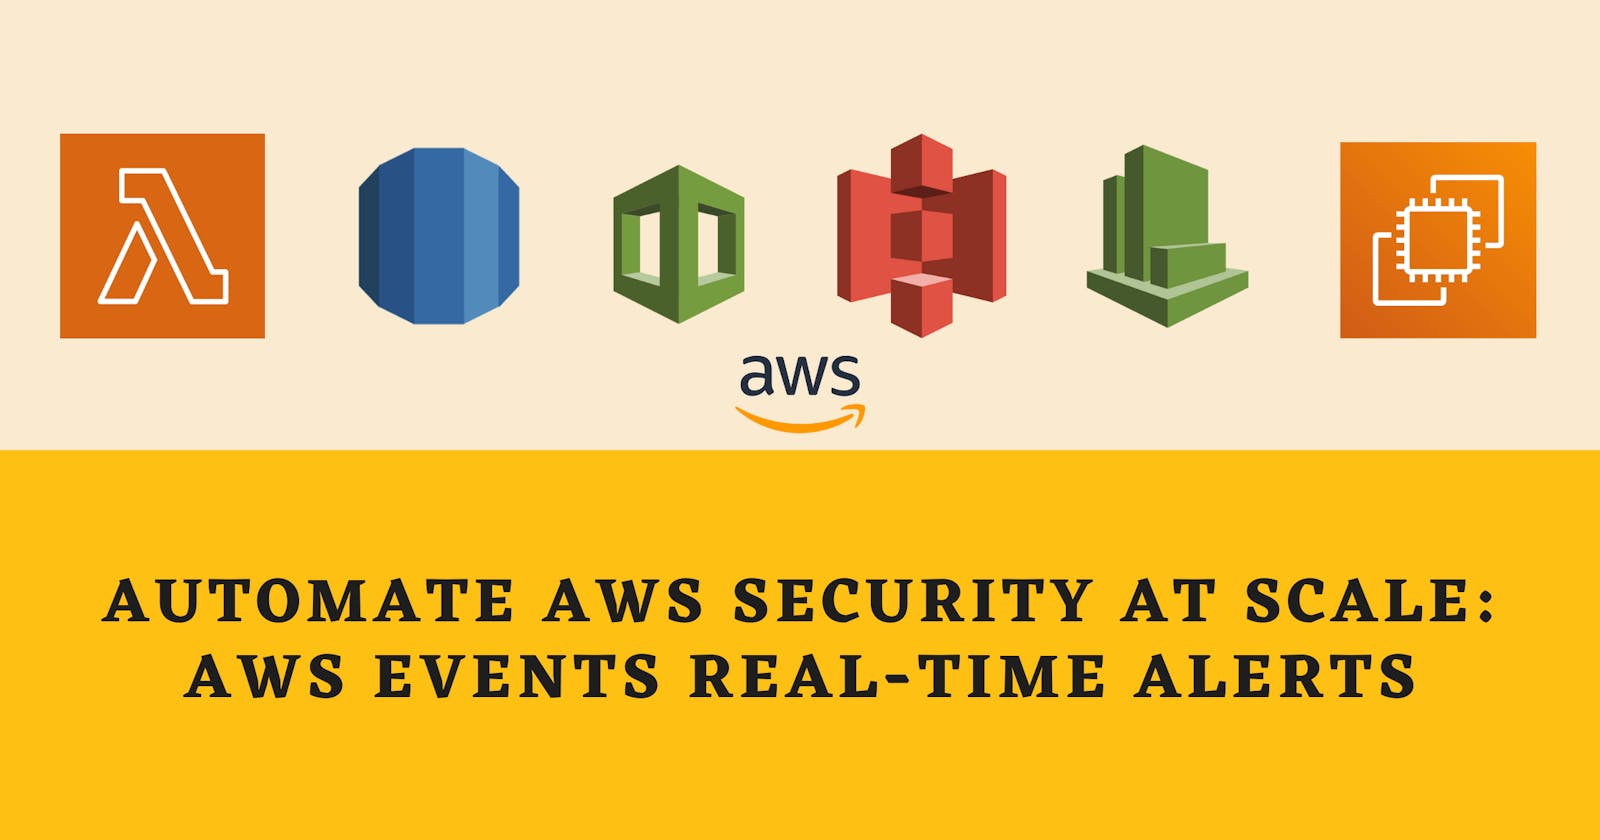 Automate AWS Security at scale: AWS events real-time alerts